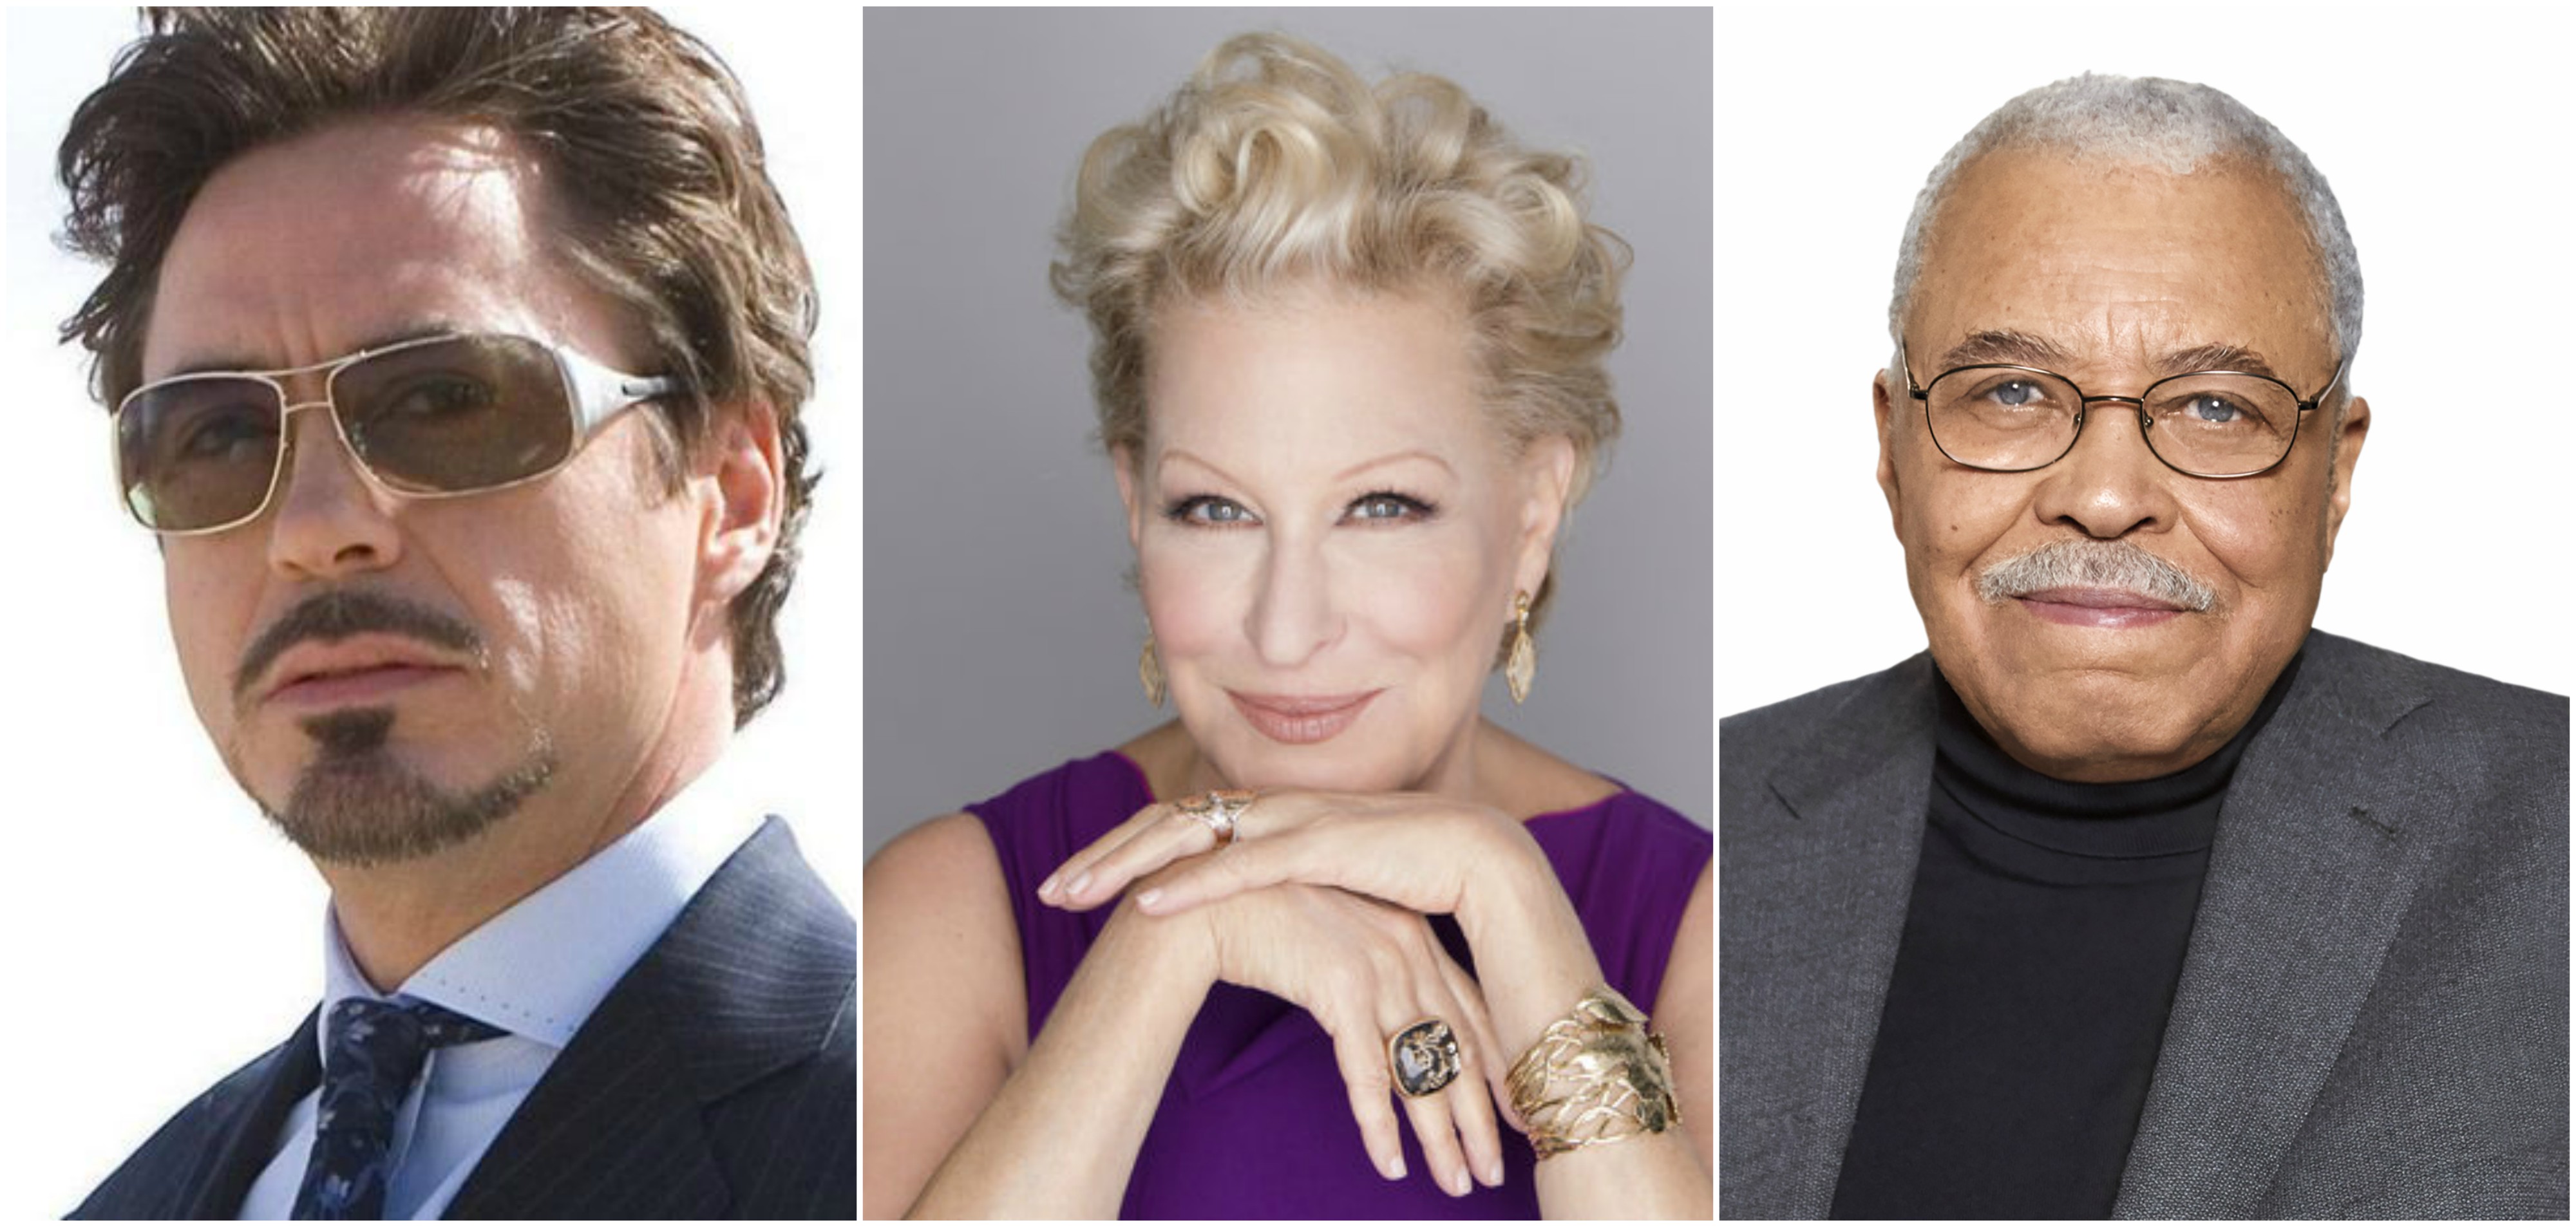 Robert Downey Jr, Bette Midler, and more to be honored at D23 Expo as Disney Legends